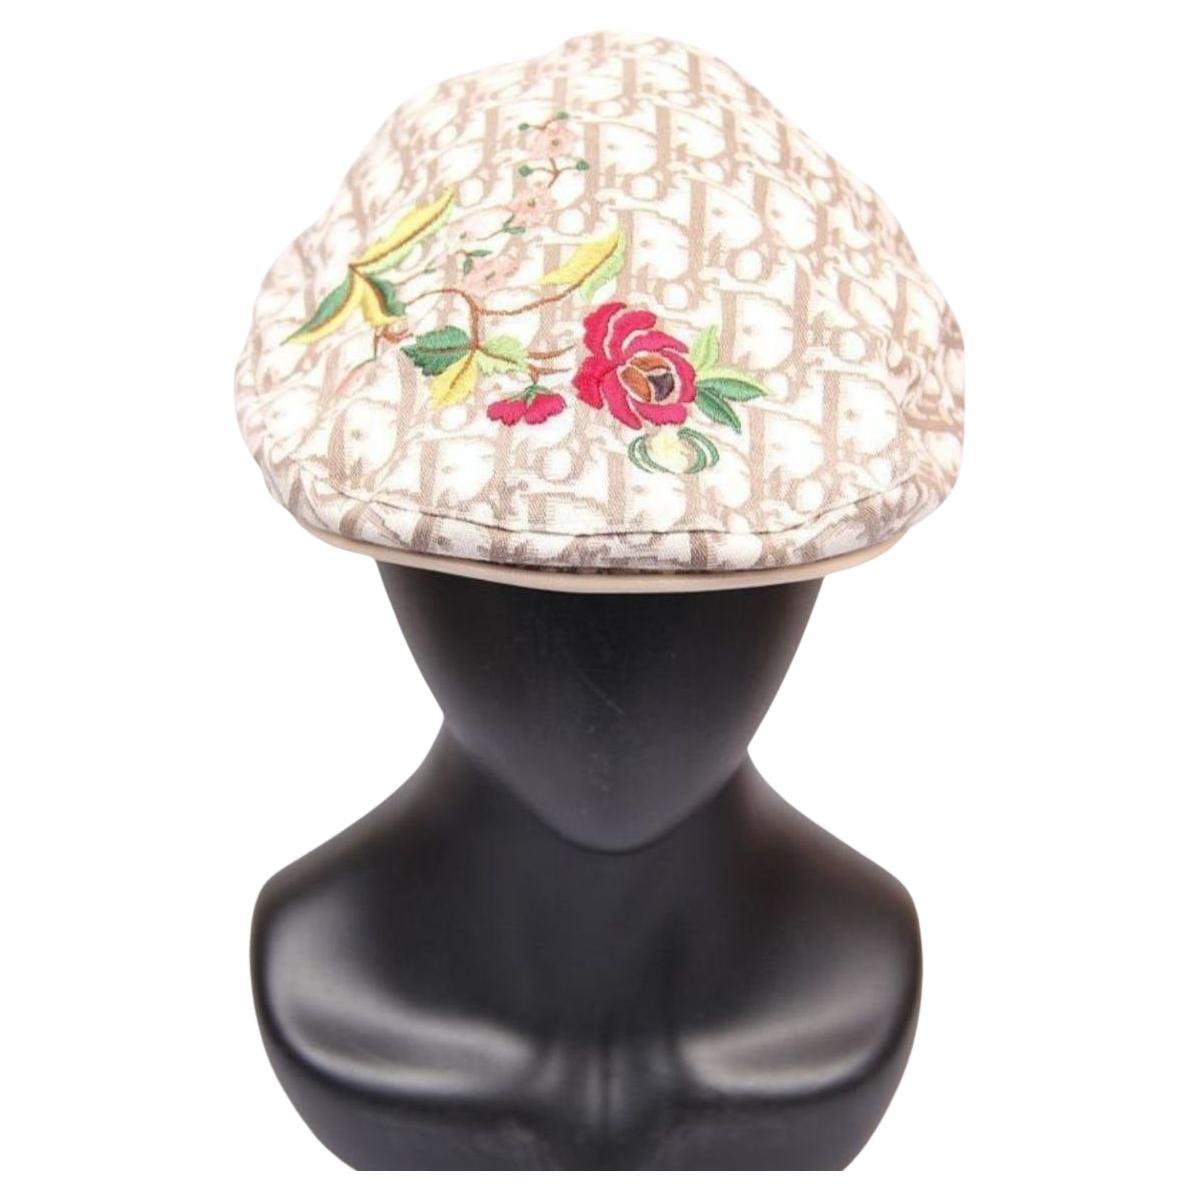 Christian Dior by Galliano flower Trotter cap SZ 58